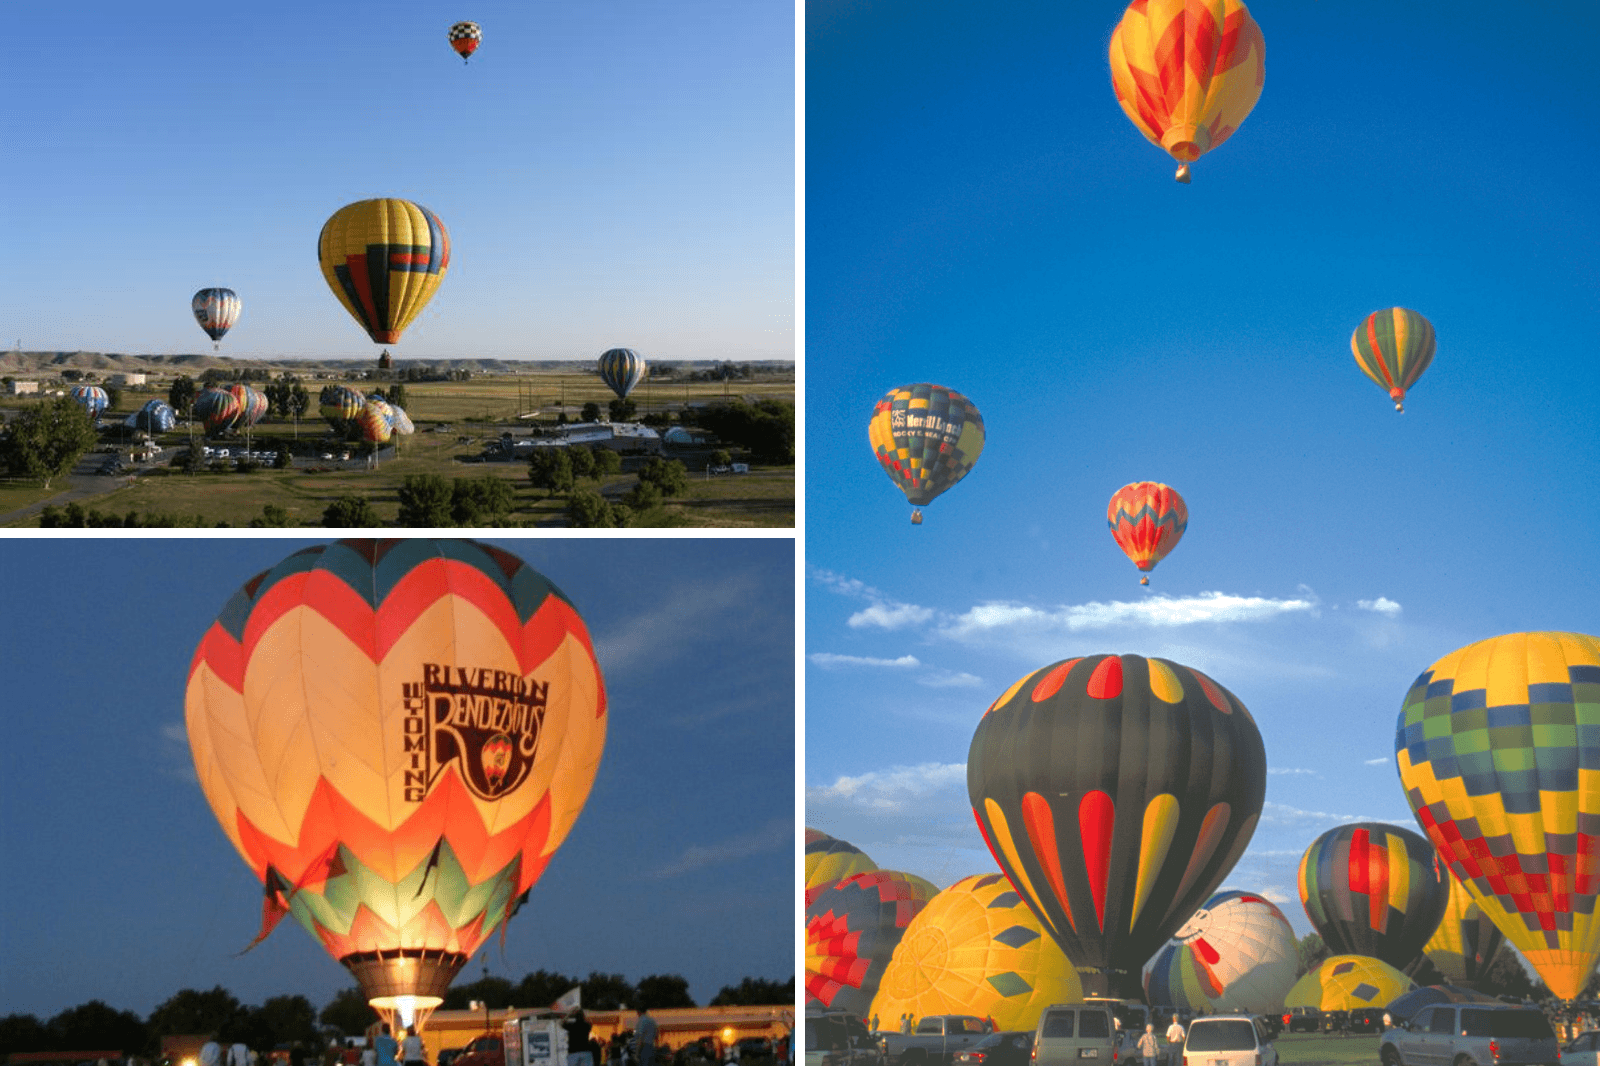 Hot air balloons over Riverton Wyoming as cultural experiences